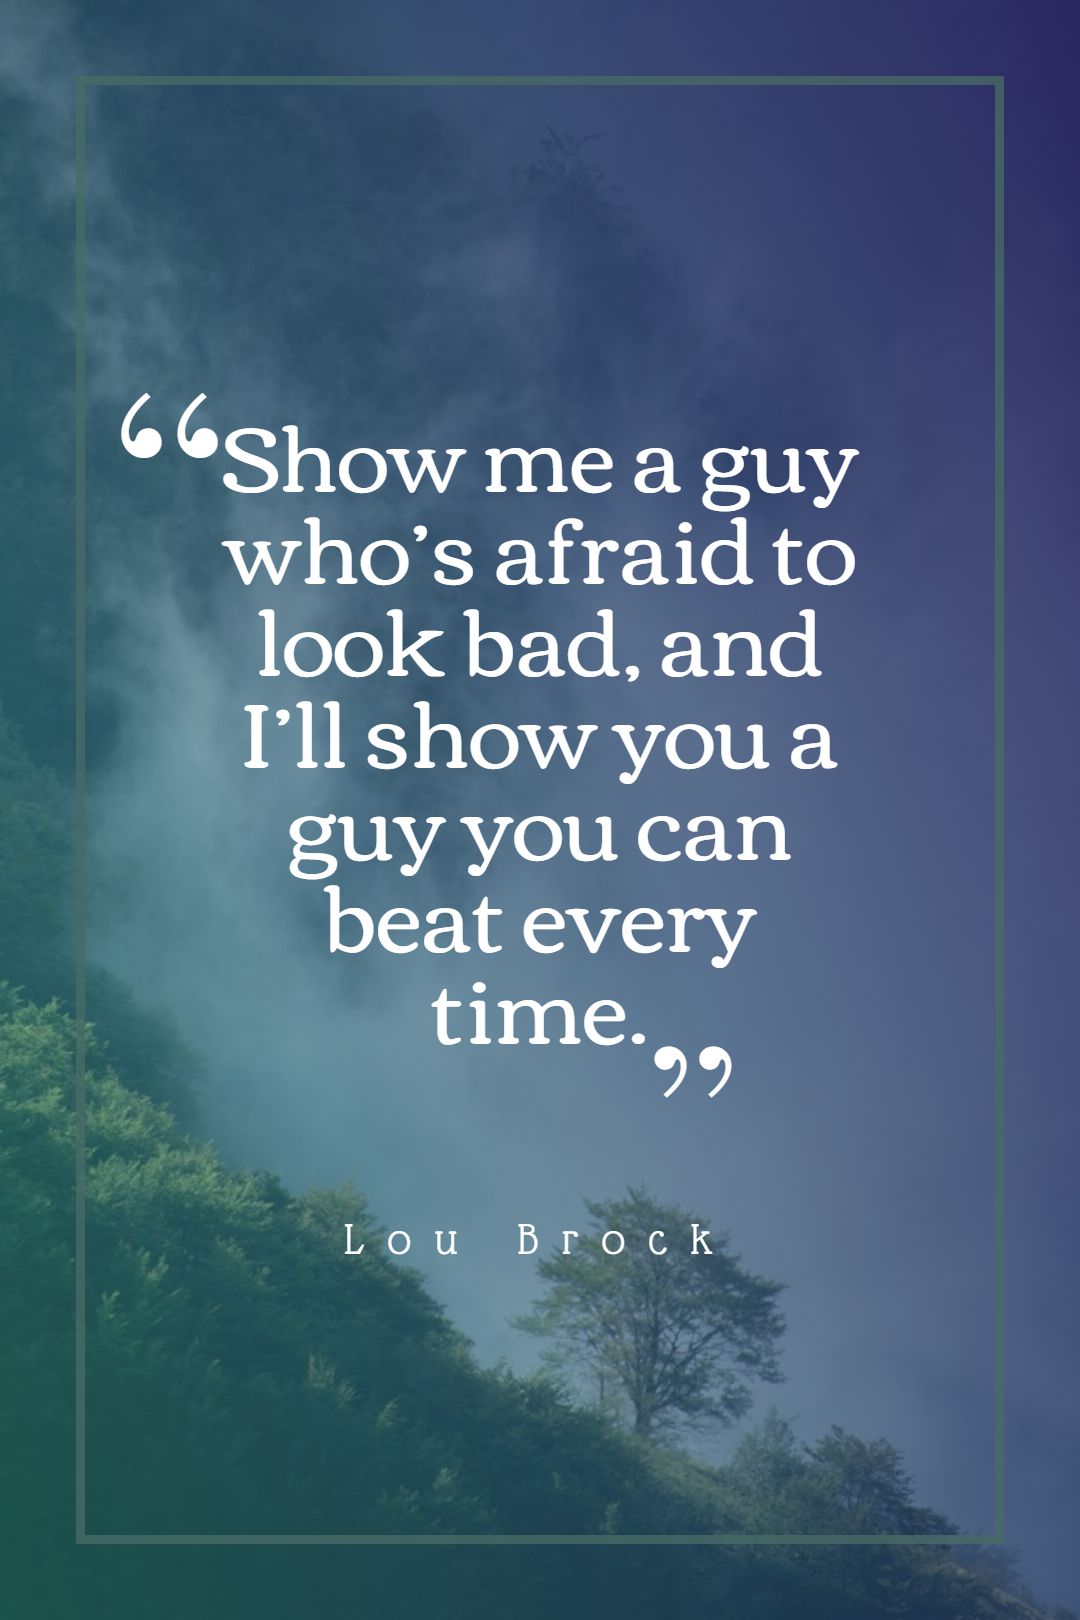 Show me a guy who’s afraid to look bad and I’ll show you a guy you can beat every time.